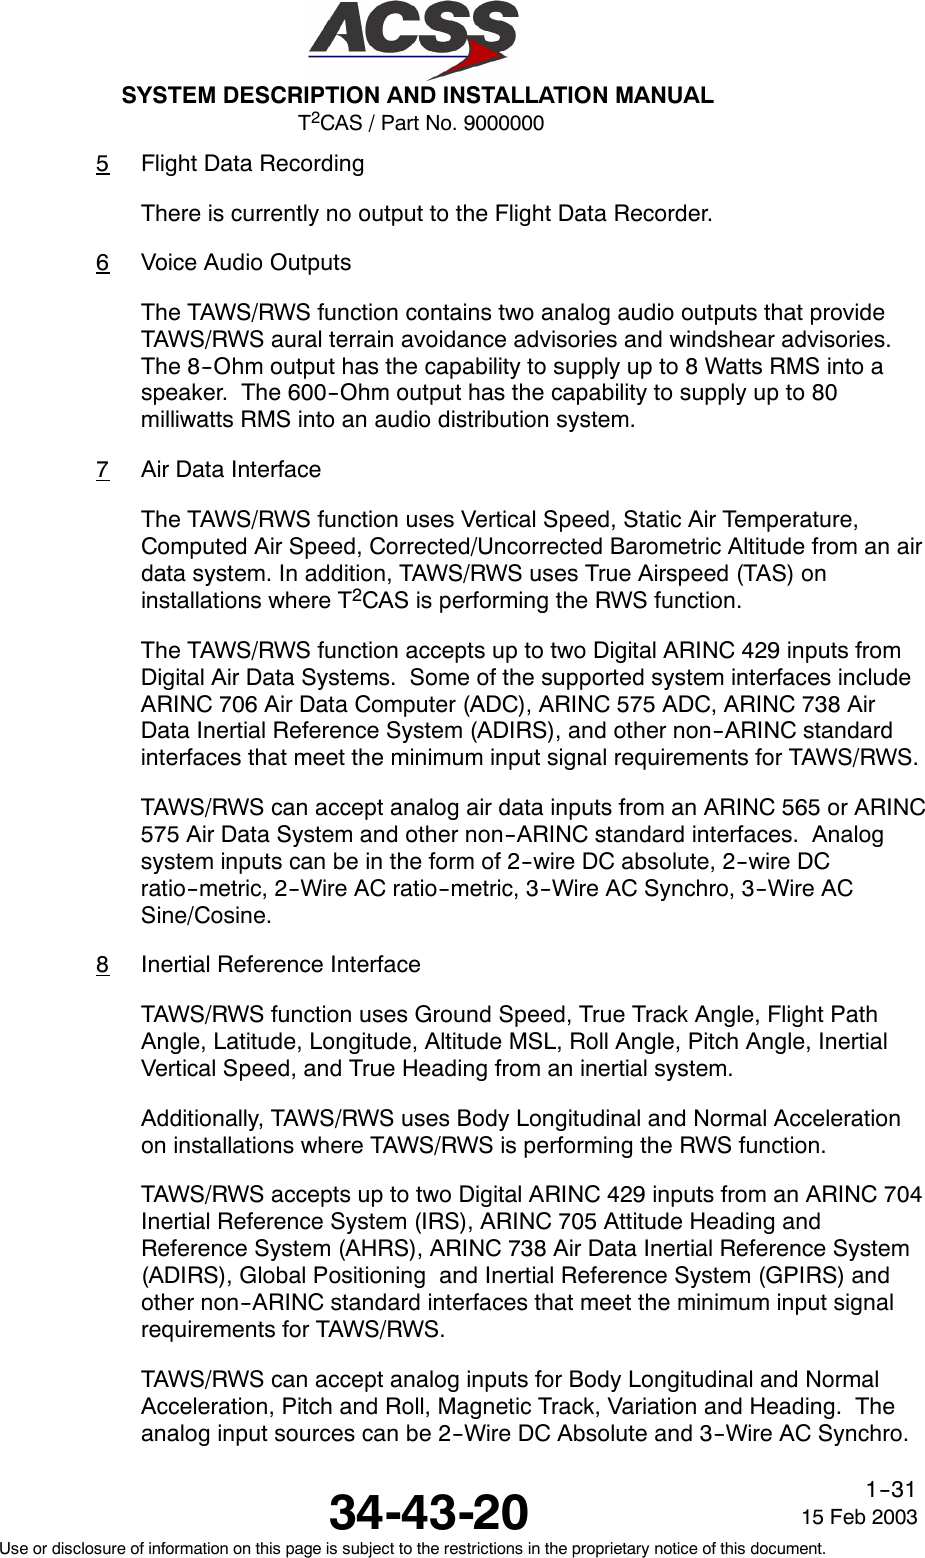 T2CAS / Part No. 9000000SYSTEM DESCRIPTION AND INSTALLATION MANUAL34-43-20 15 Feb 2003Use or disclosure of information on this page is subject to the restrictions in the proprietary notice of this document.1--315Flight Data RecordingThere is currently no output to the Flight Data Recorder.6Voice Audio OutputsThe TAWS/RWS function contains two analog audio outputs that provideTAWS/RWS aural terrain avoidance advisories and windshear advisories.The 8--Ohm output has the capability to supply up to 8 Watts RMS into aspeaker. The 600--Ohm output has the capability to supply up to 80milliwatts RMS into an audio distribution system.7Air Data InterfaceThe TAWS/RWS function uses Vertical Speed, Static Air Temperature,Computed Air Speed, Corrected/Uncorrected Barometric Altitude from an airdata system. In addition, TAWS/RWS uses True Airspeed (TAS) oninstallations where T2CAS is performing the RWS function.The TAWS/RWS function accepts up to two Digital ARINC 429 inputs fromDigital Air Data Systems. Some of the supported system interfaces includeARINC 706 Air Data Computer (ADC), ARINC 575 ADC, ARINC 738 AirData Inertial Reference System (ADIRS), and other non--ARINC standardinterfaces that meet the minimum input signal requirements for TAWS/RWS.TAWS/RWS can accept analog air data inputs from an ARINC 565 or ARINC575 Air Data System and other non--ARINC standard interfaces. Analogsystem inputs can be in the form of 2--wire DC absolute, 2--wire DCratio--metric, 2--Wire AC ratio--metric, 3--Wire AC Synchro, 3--Wire ACSine/Cosine.8Inertial Reference InterfaceTAWS/RWS function uses Ground Speed, True Track Angle, Flight PathAngle, Latitude, Longitude, Altitude MSL, Roll Angle, Pitch Angle, InertialVertical Speed, and True Heading from an inertial system.Additionally, TAWS/RWS uses Body Longitudinal and Normal Accelerationon installations where TAWS/RWS is performing the RWS function.TAWS/RWS accepts up to two Digital ARINC 429 inputs from an ARINC 704Inertial Reference System (IRS), ARINC 705 Attitude Heading andReference System (AHRS), ARINC 738 Air Data Inertial Reference System(ADIRS), Global Positioning and Inertial Reference System (GPIRS) andother non--ARINC standard interfaces that meet the minimum input signalrequirements for TAWS/RWS.TAWS/RWS can accept analog inputs for Body Longitudinal and NormalAcceleration, Pitch and Roll, Magnetic Track, Variation and Heading. Theanalog input sources can be 2--Wire DC Absolute and 3--Wire AC Synchro.